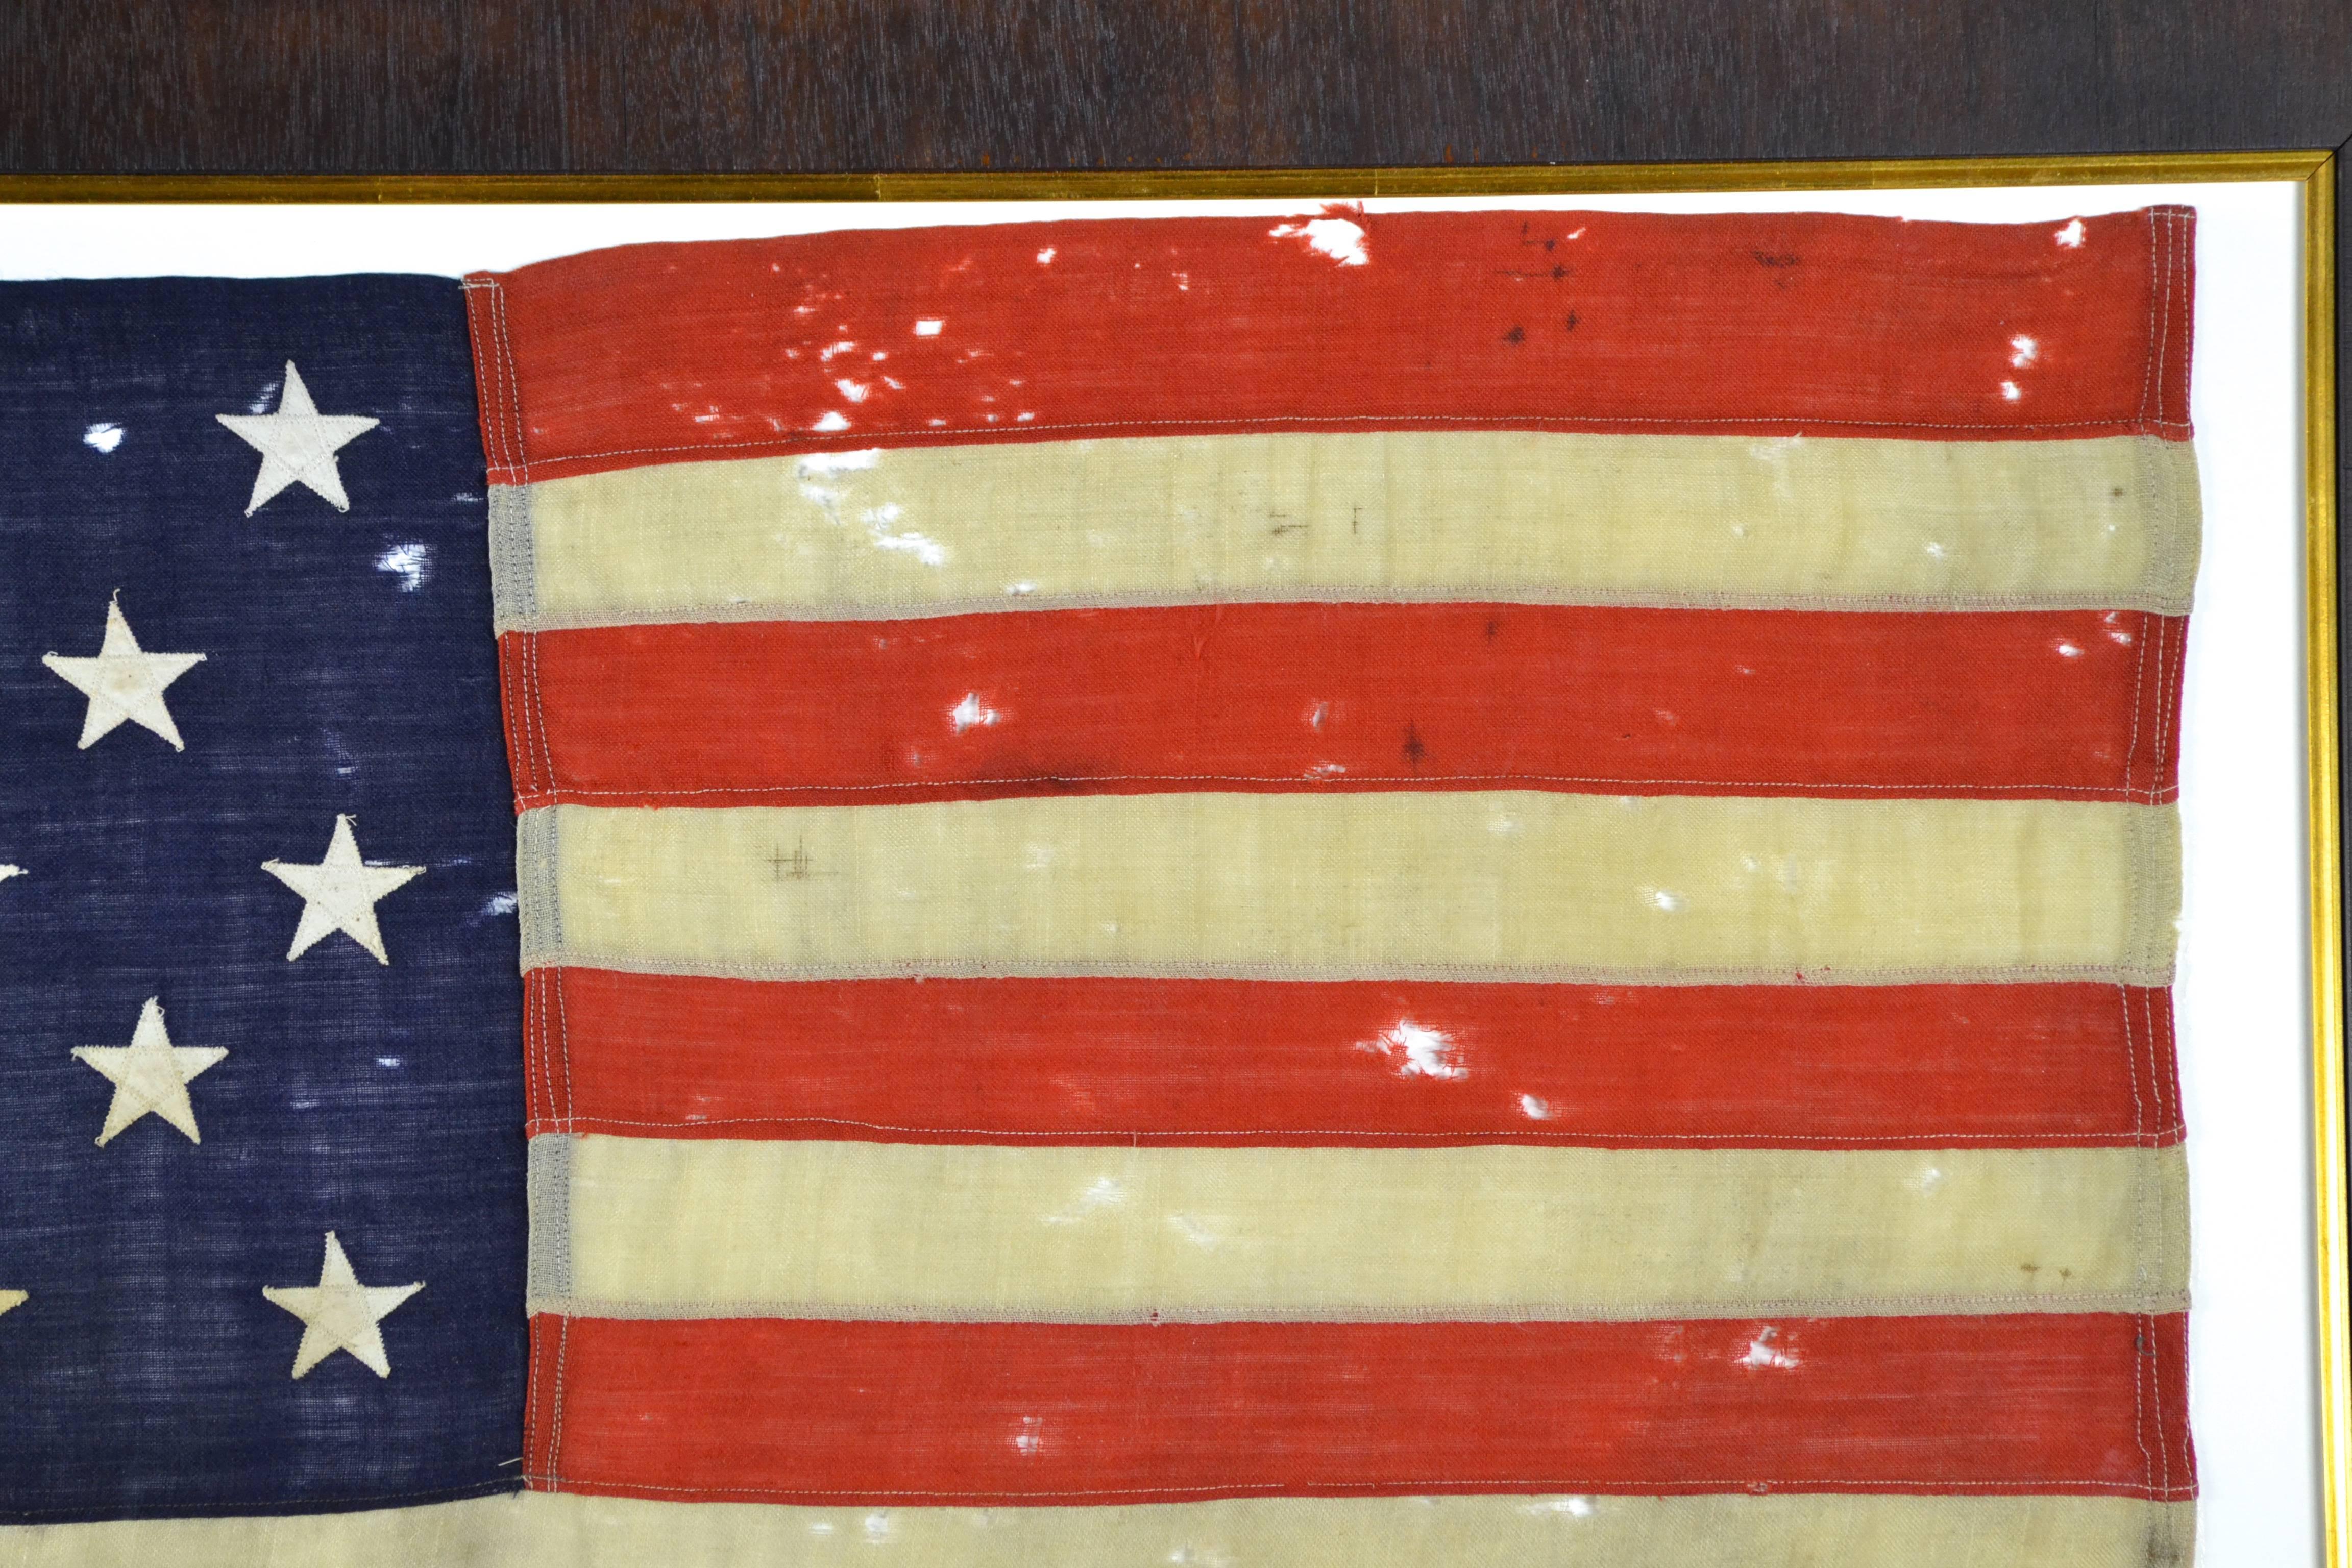 Woven Beautiful 13 Star American Flag For Sale